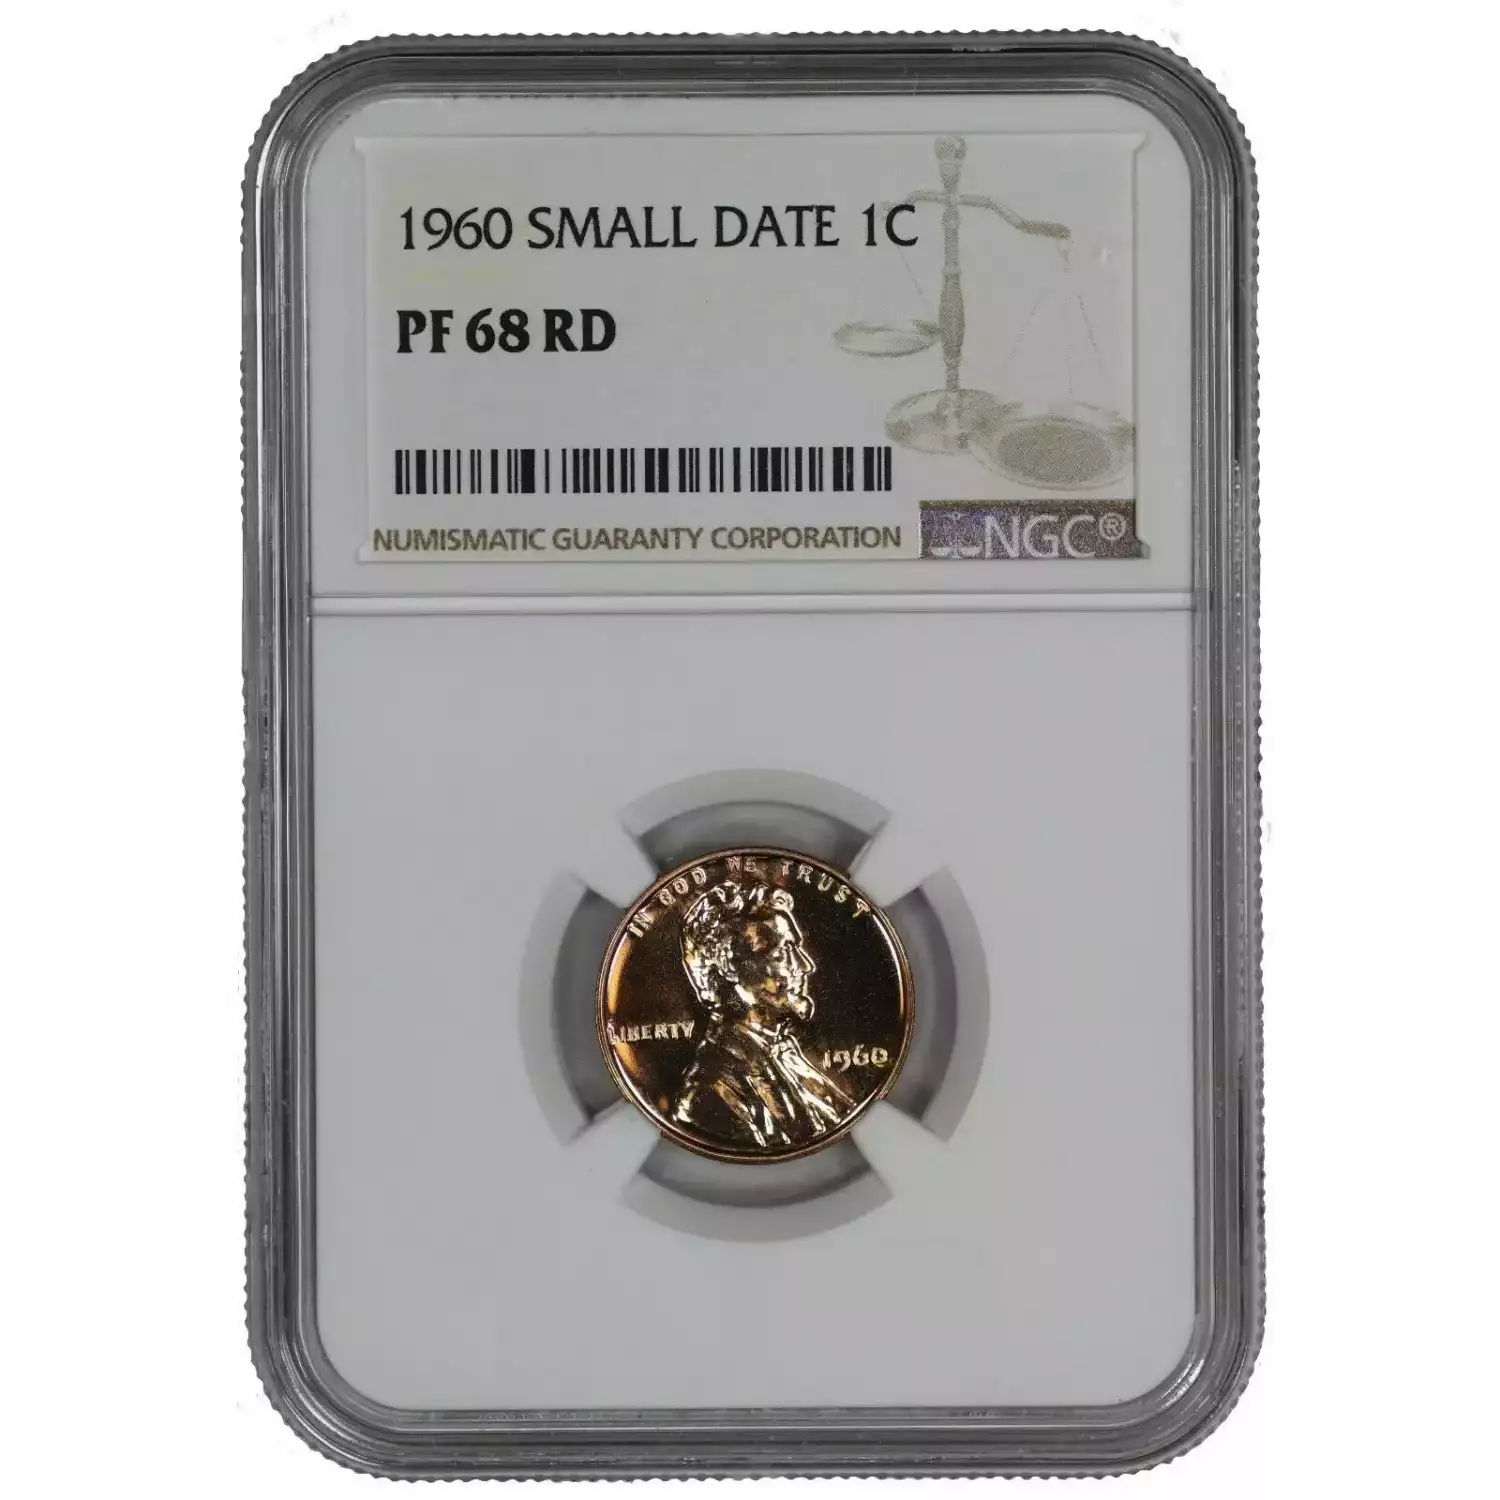 1960 SMALL DATE PROOF LINCOLN MEMORIAL CENT PENNY 1C NGC CERTIFIED PF 68 RD